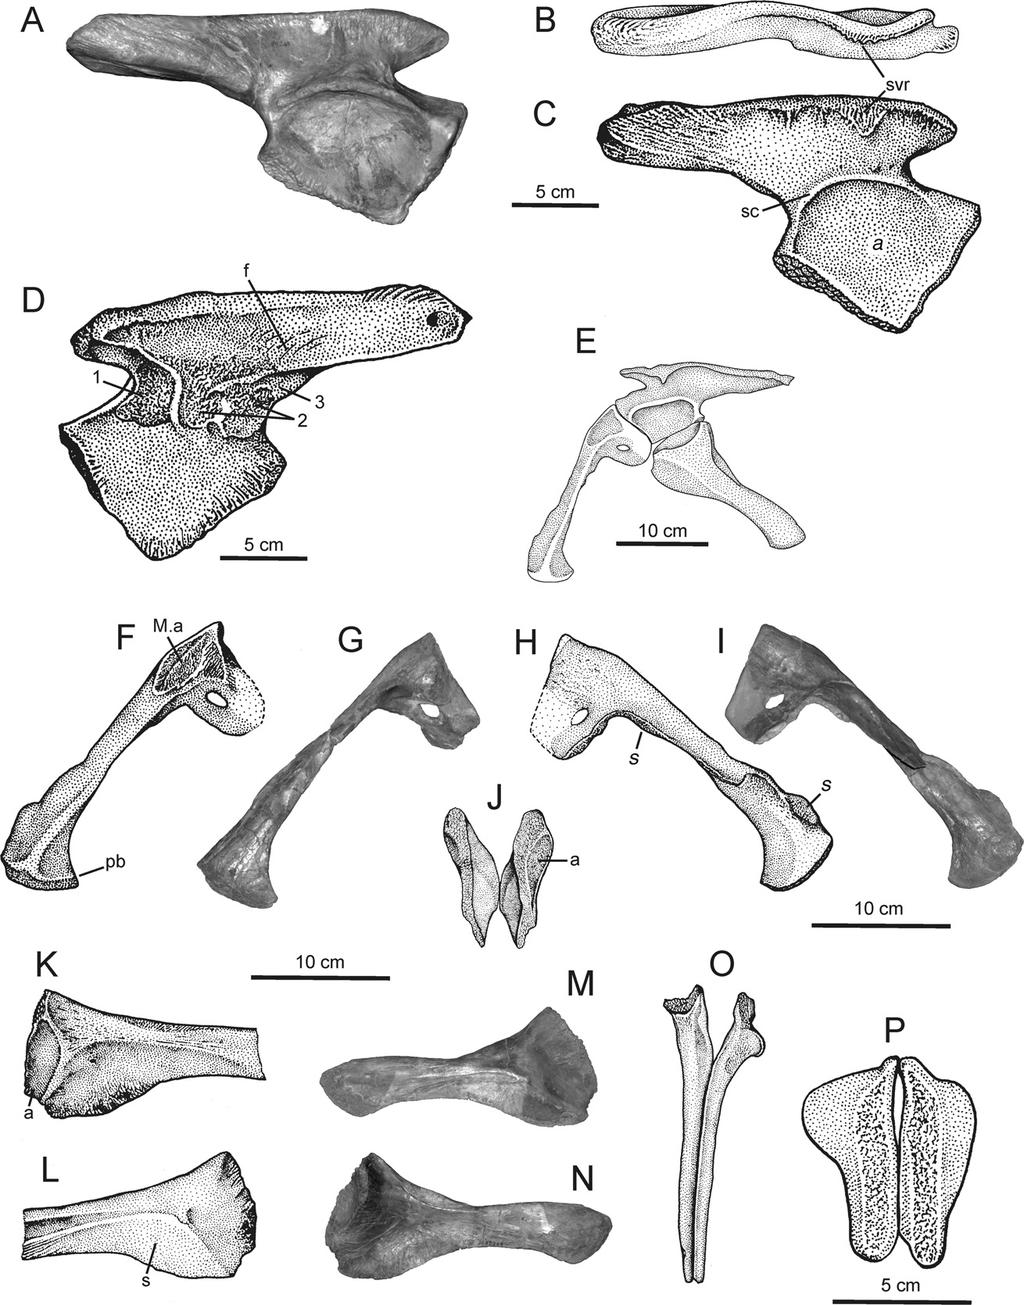 112 JOURNAL OF VERTEBRATE PALEONTOLOGY, VOL. 29, NO. 1, 2009 FIGURE 5. Pelvis of Batrachotomus kupferzellensis. A C, Lateral and dorsal views of right ilium of SMNS 80269.